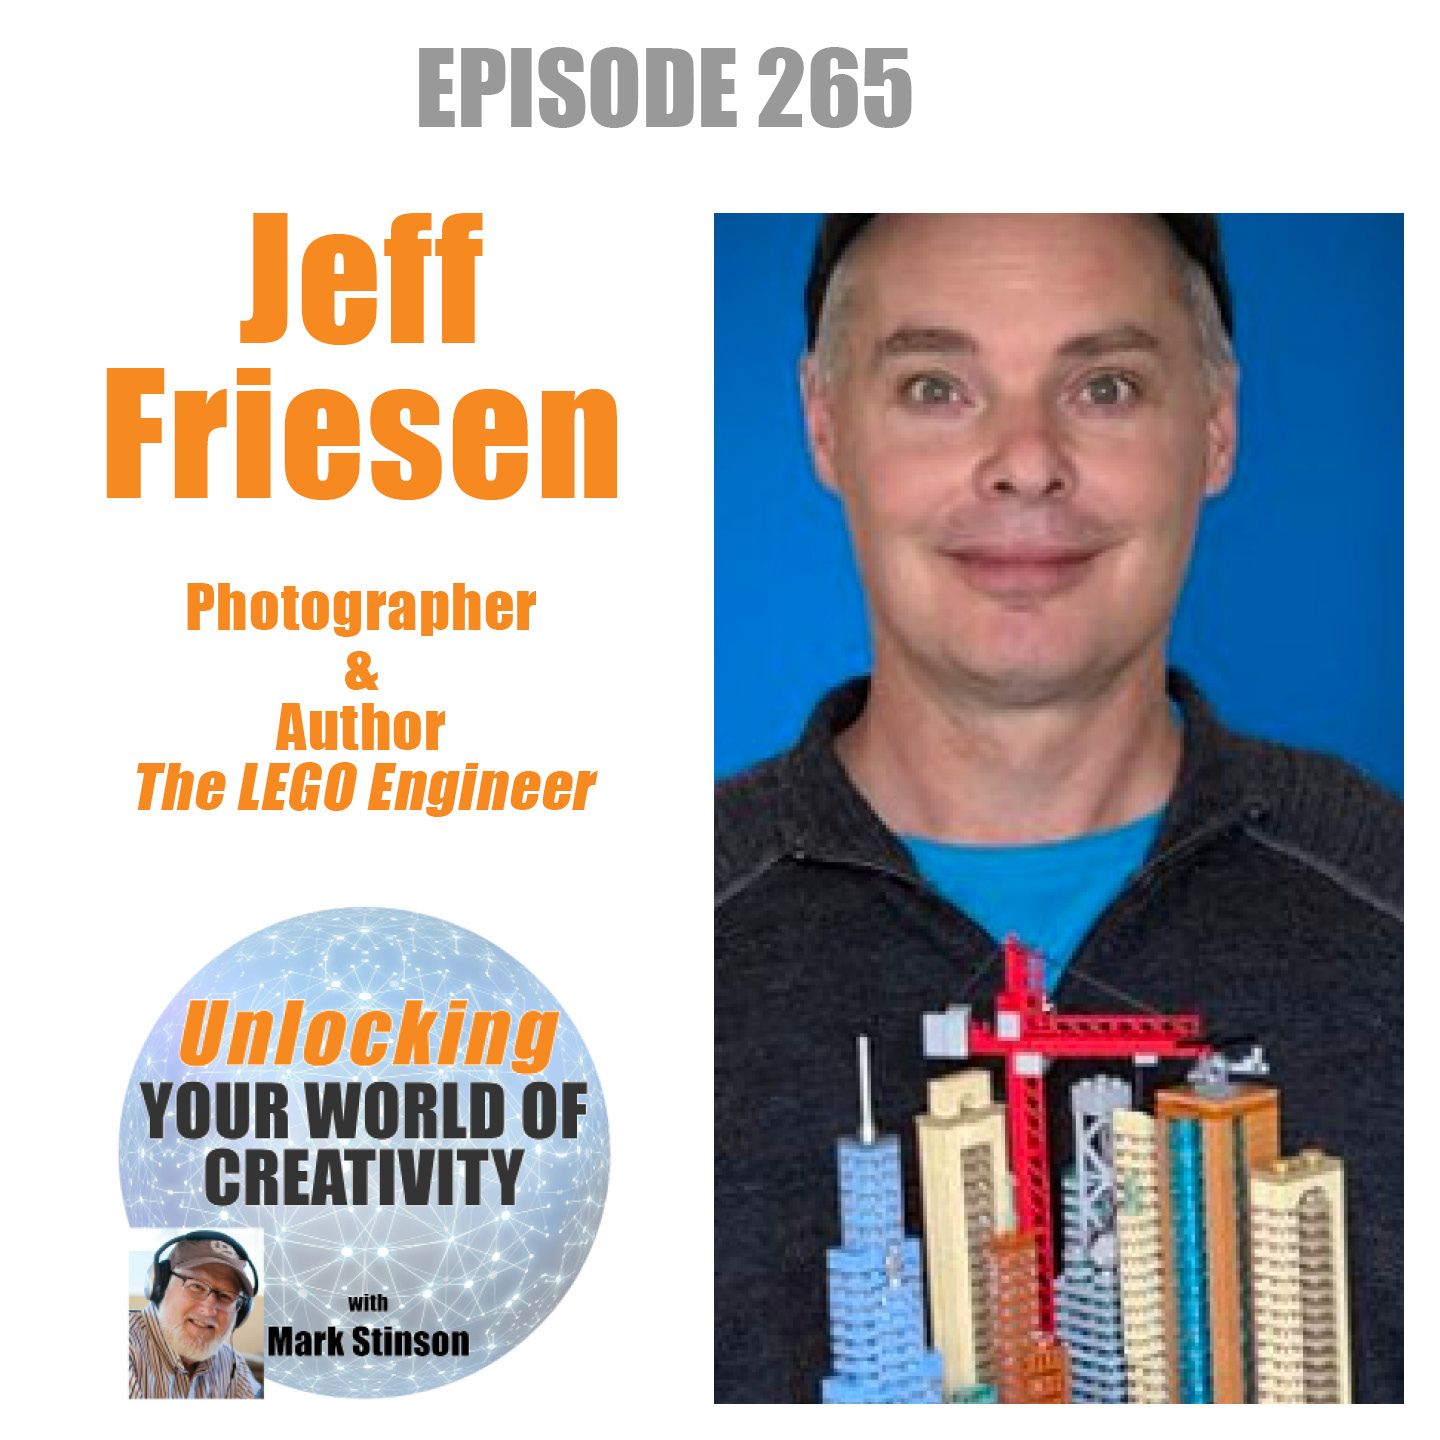 Jeff Friesen, Photographer and Author, “The LEGO Engineer”